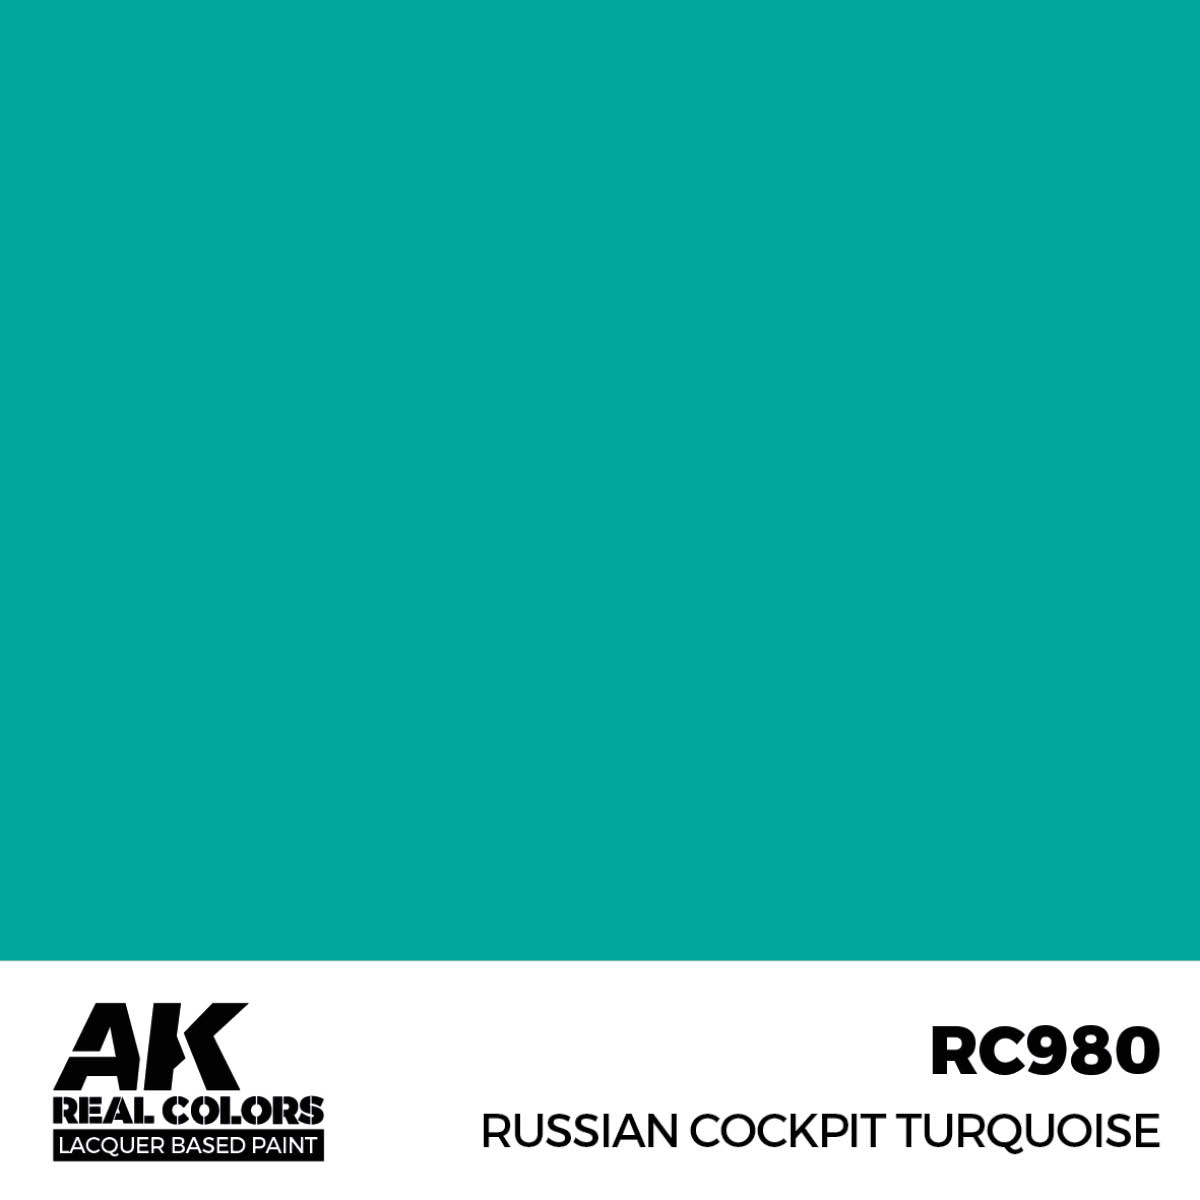 Russian Cockpit Turquoise